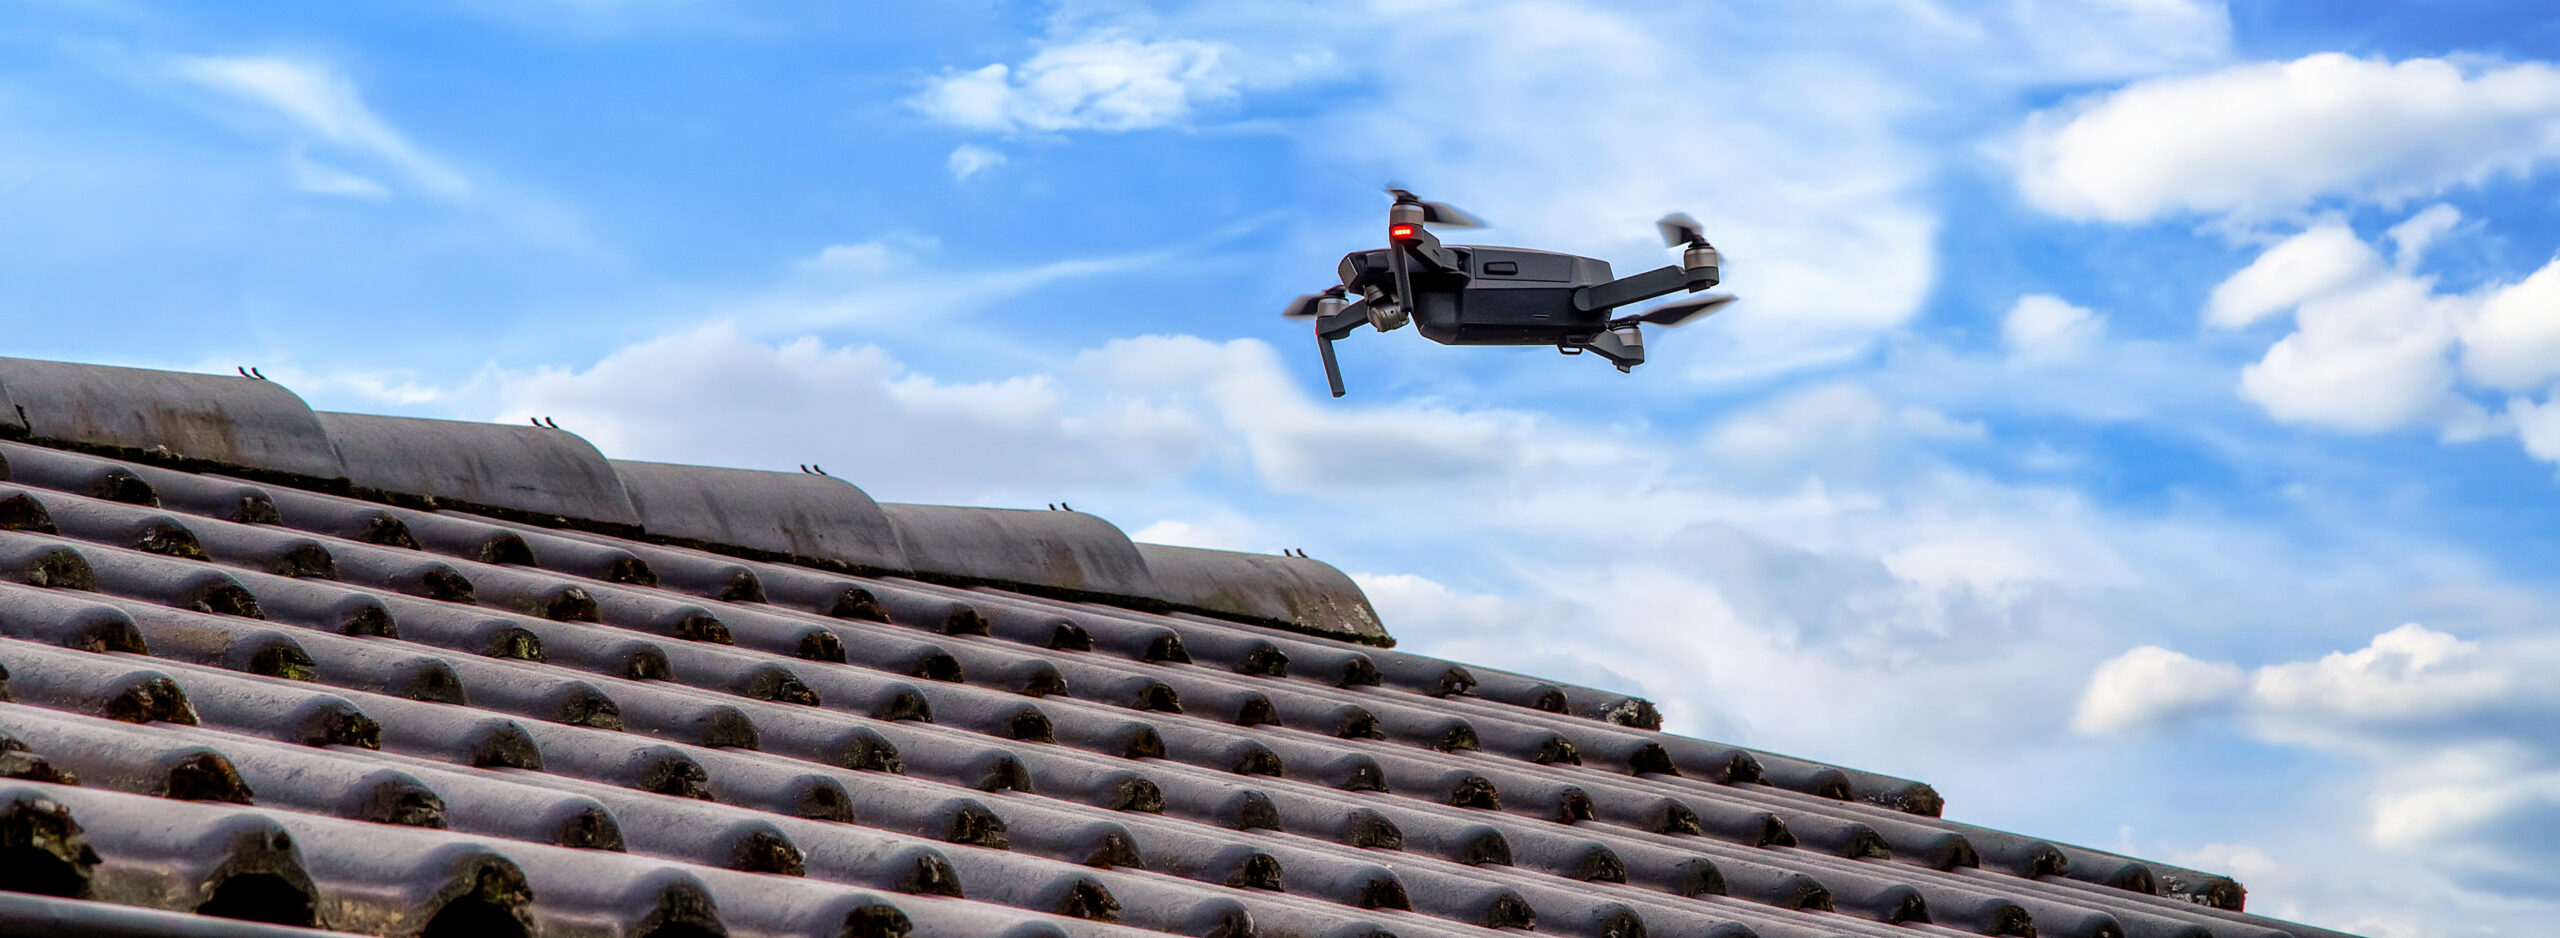 Drone Roof Inspection - Drone Flying over tile roof